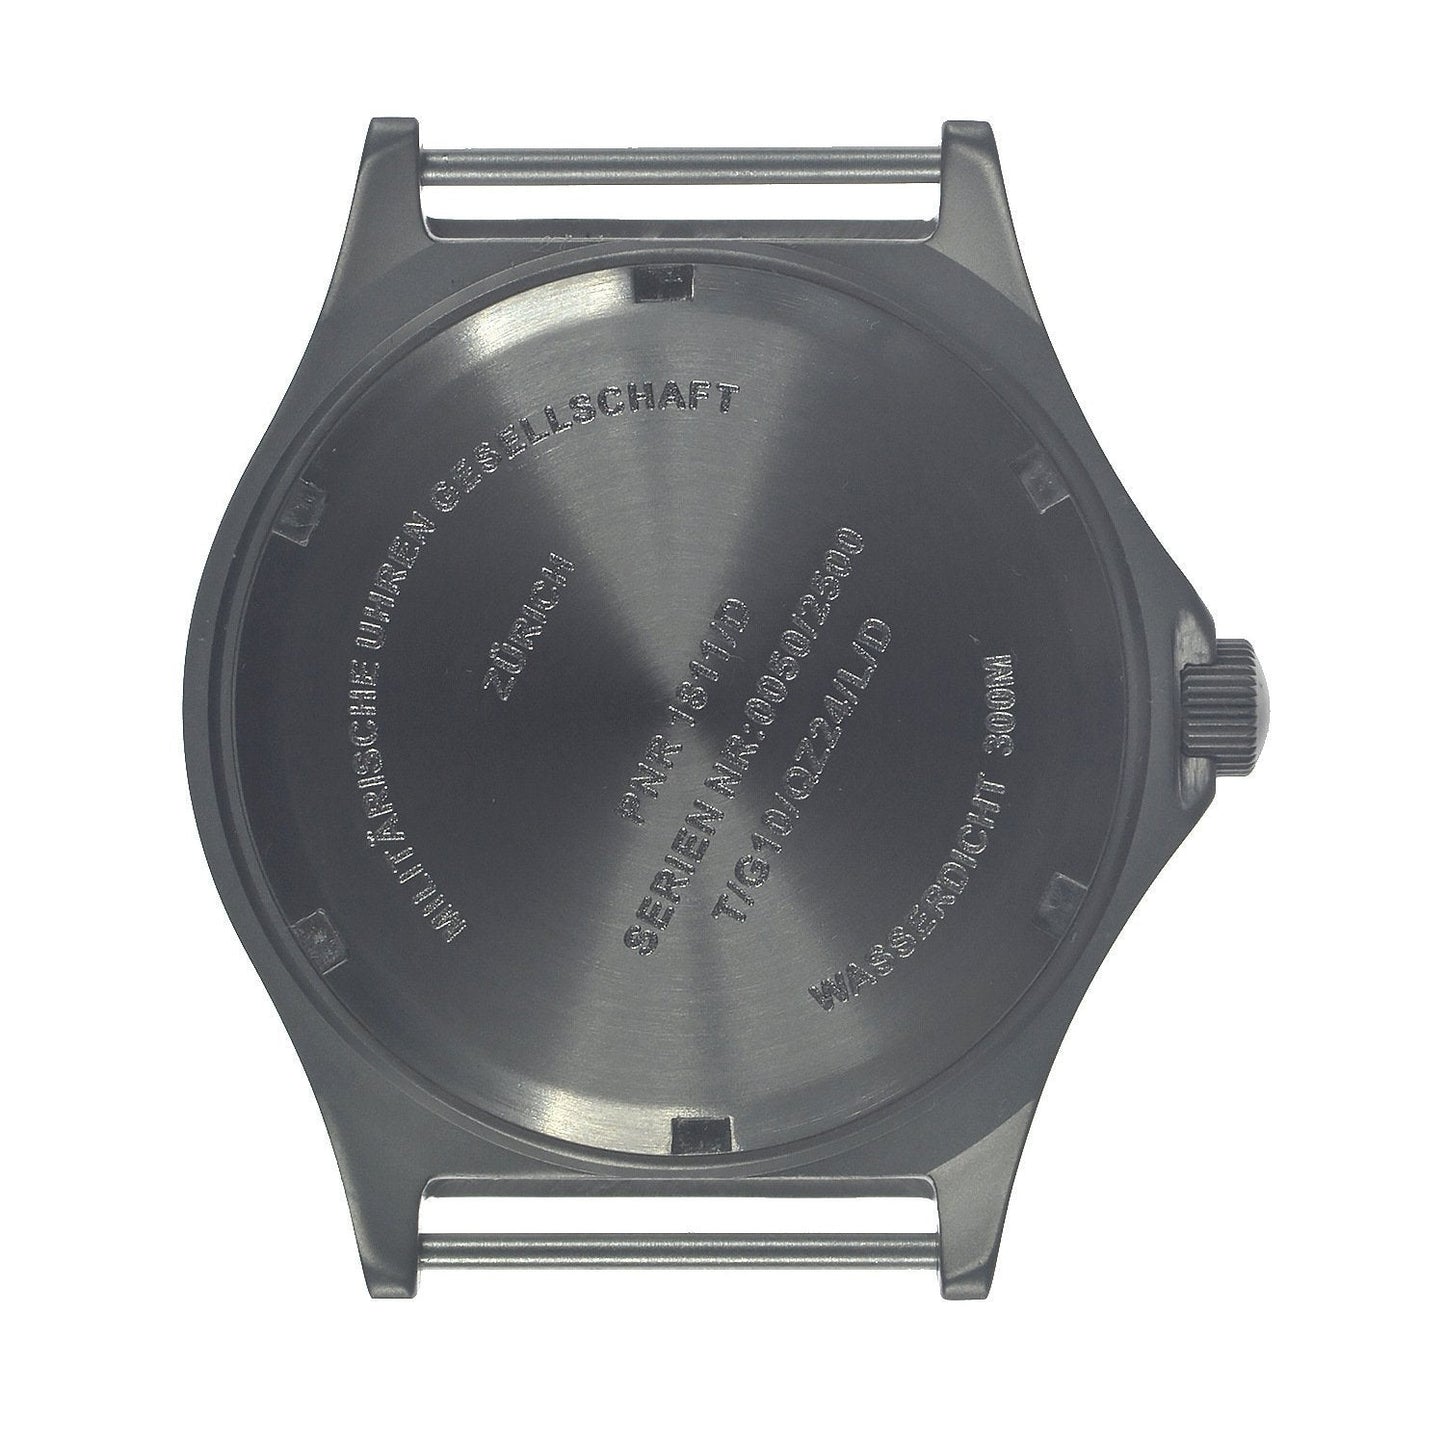 MWC Titanium General Service Watch, 300m Water Resistant, 10 Year Battery Life, Luminova, Sapphire Crystal and 12/24 Dial Format (Date Version)